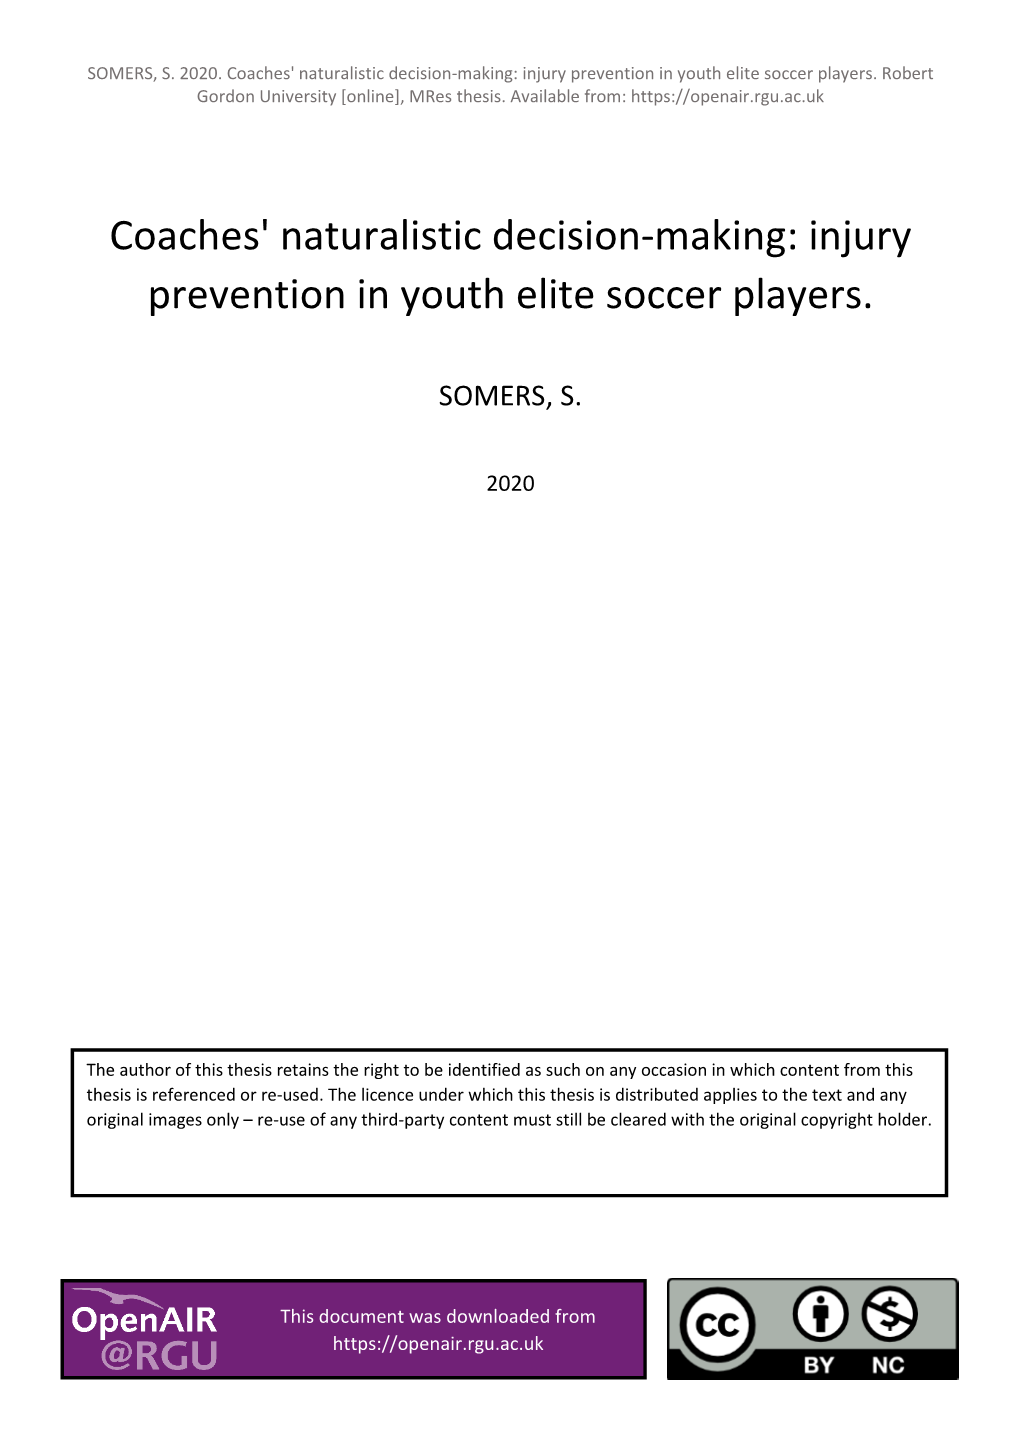 Coaches' Naturalistic Decision-Making: Injury Prevention in Youth Elite Soccer Players